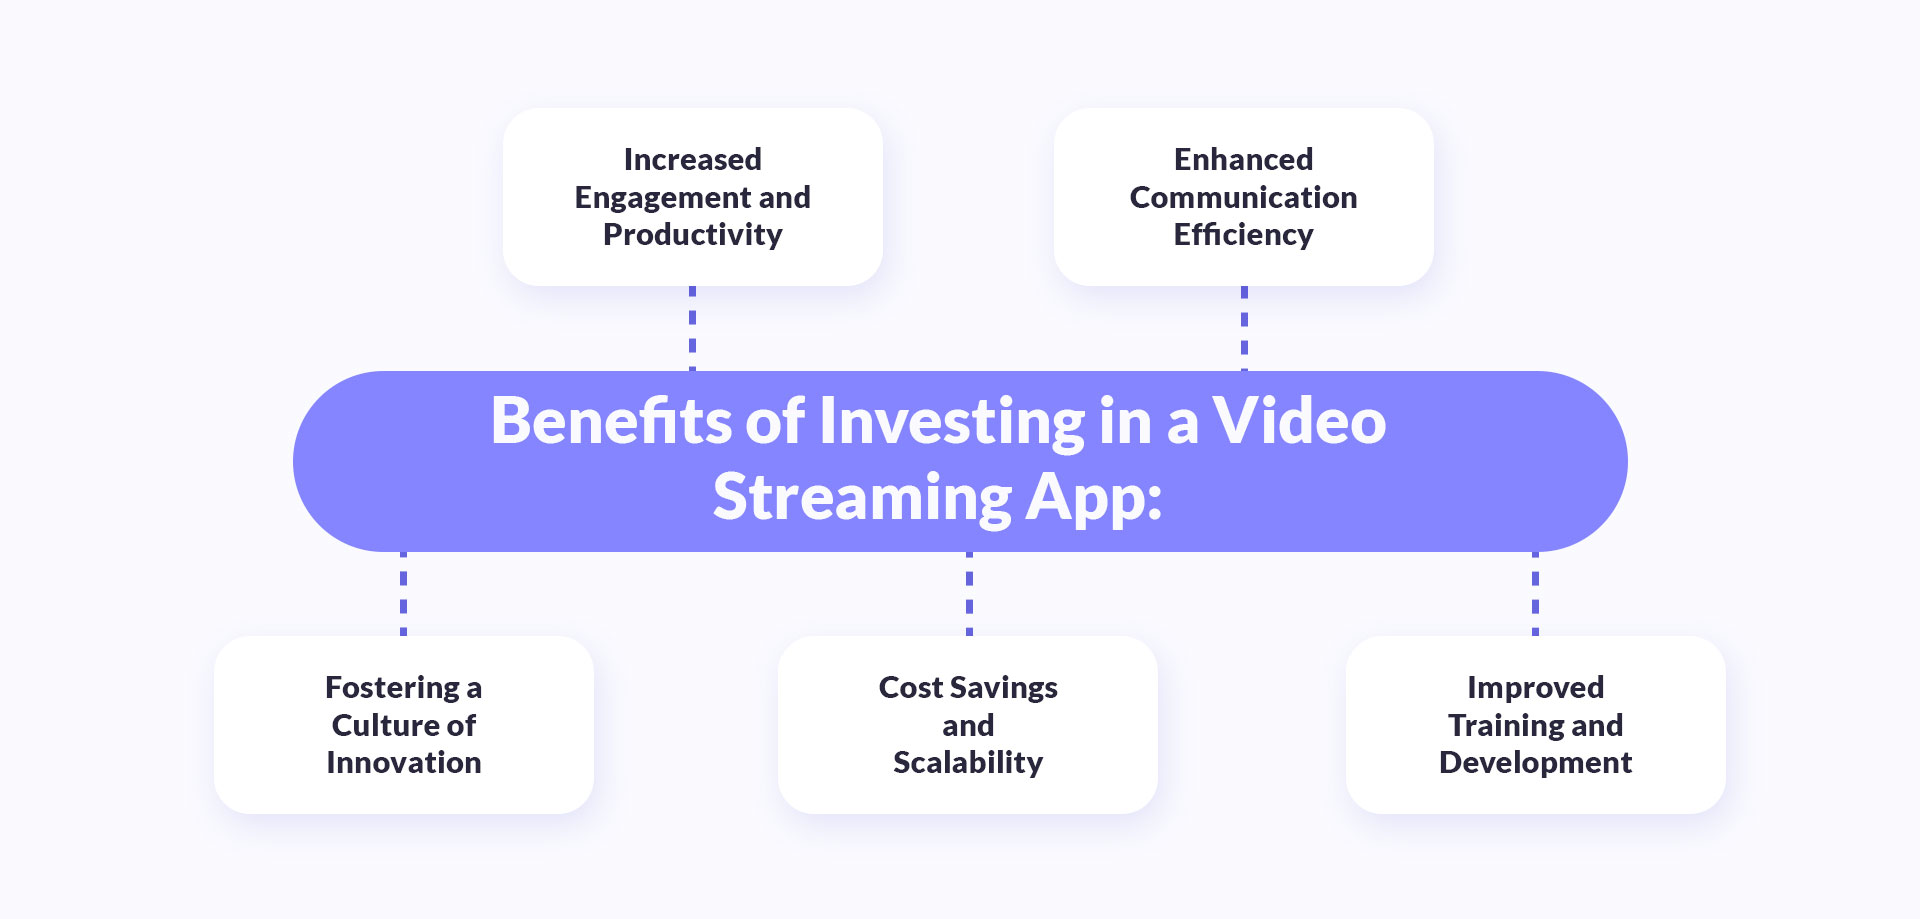 Benefits of investing in a video streaming app